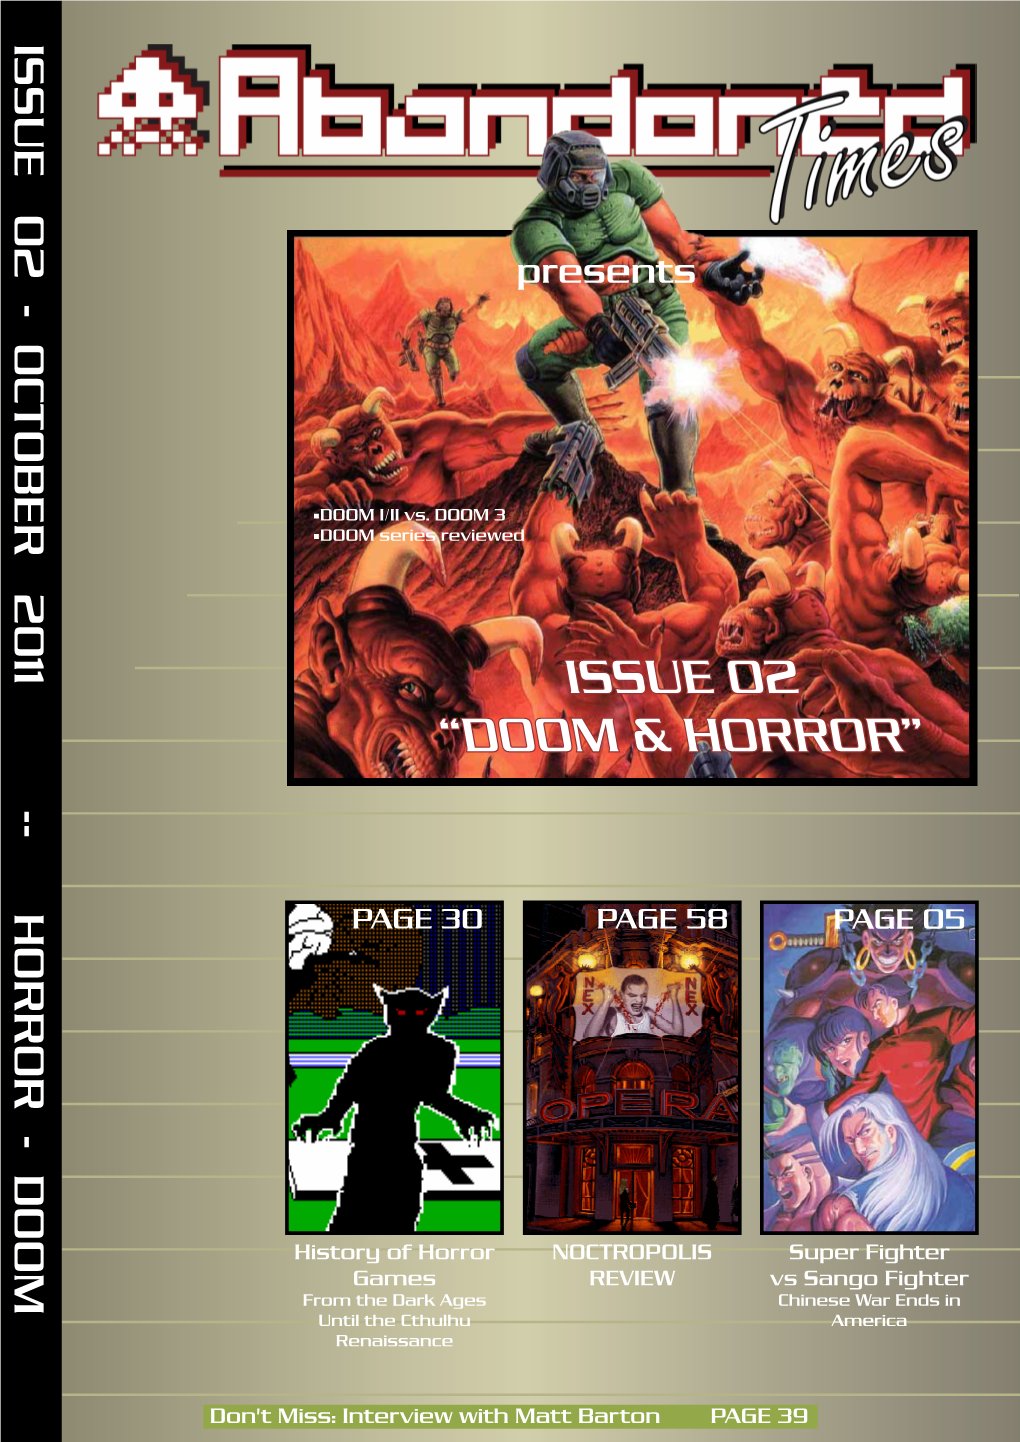 ISSUE 02 ISSUE NOCTROPOLIS Presents “DOOM & HORROR” & “DOOM Games PAGE 30 PAGE Renaissance Until the Cthulhu ■DOOM I/II Vs